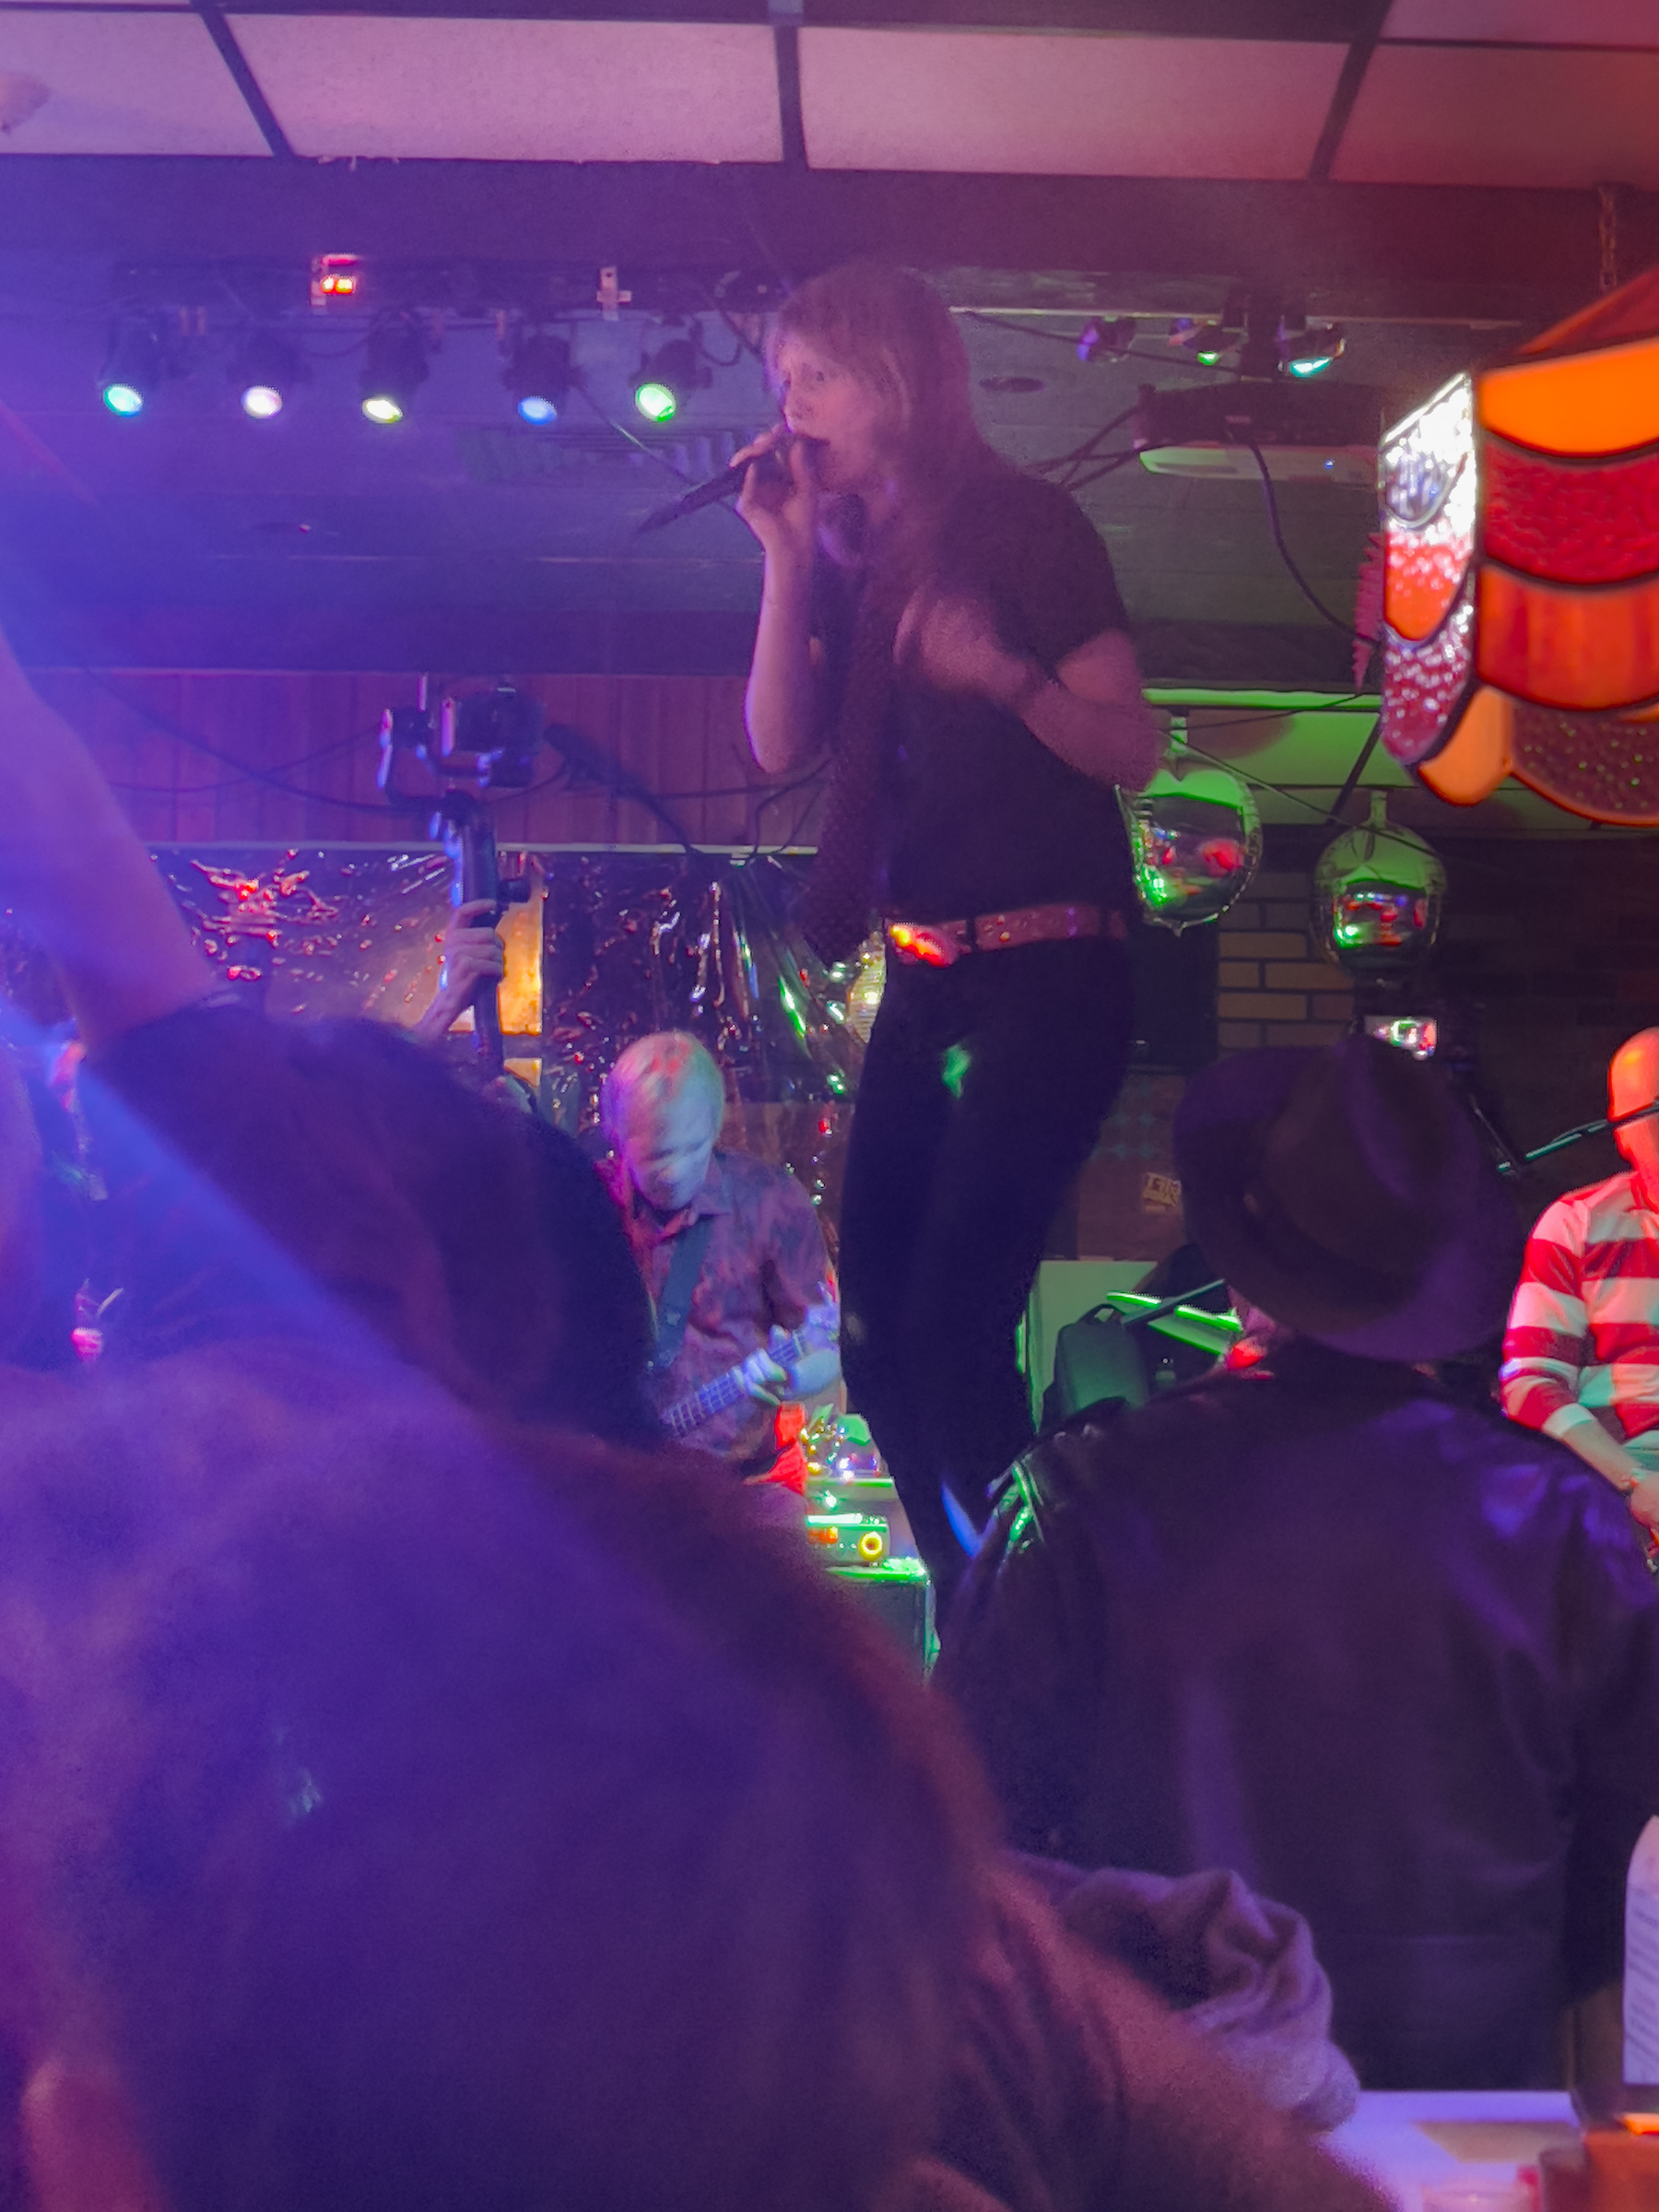 Woman singing into a mic at a bar surrounded by her fans.